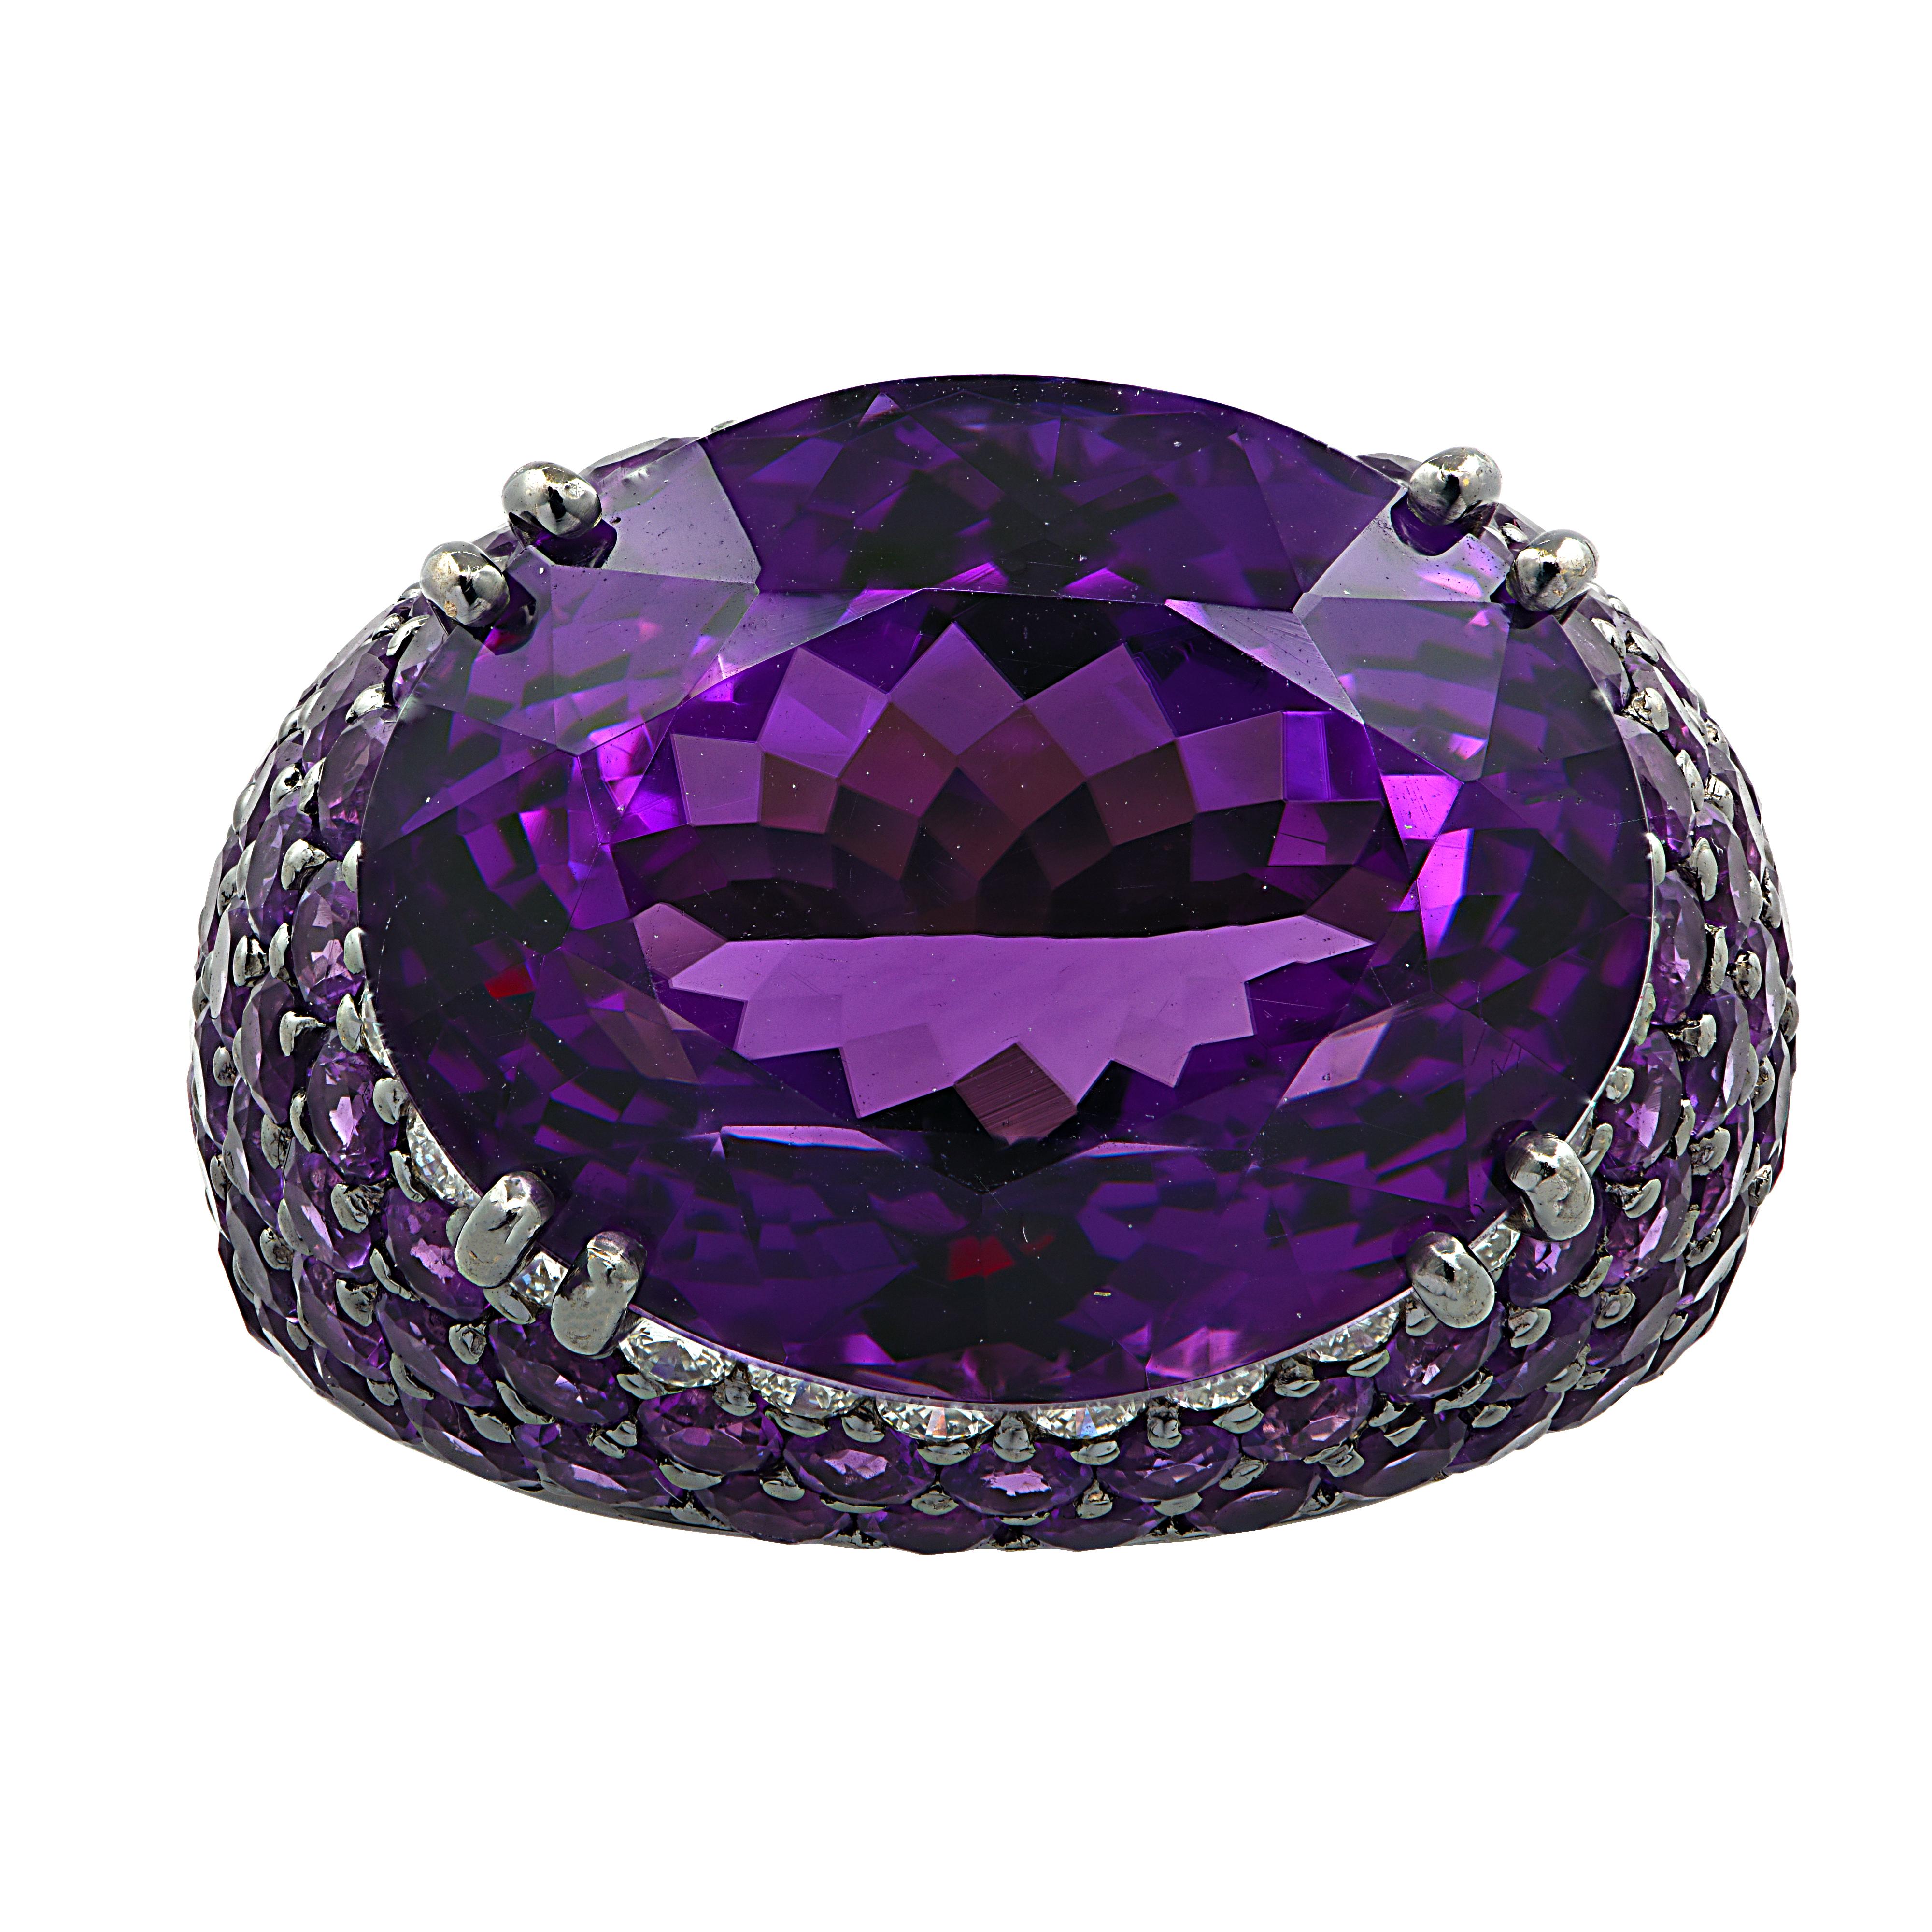 Magnificent cocktail ring crafted in 18 karat white gold and black rhodium, showcasing a sensational oval amethyst weighing approximately 15 carats adorned with 24 round brilliant cut diamonds weighing approximately 0.5 carats total, G color, VS